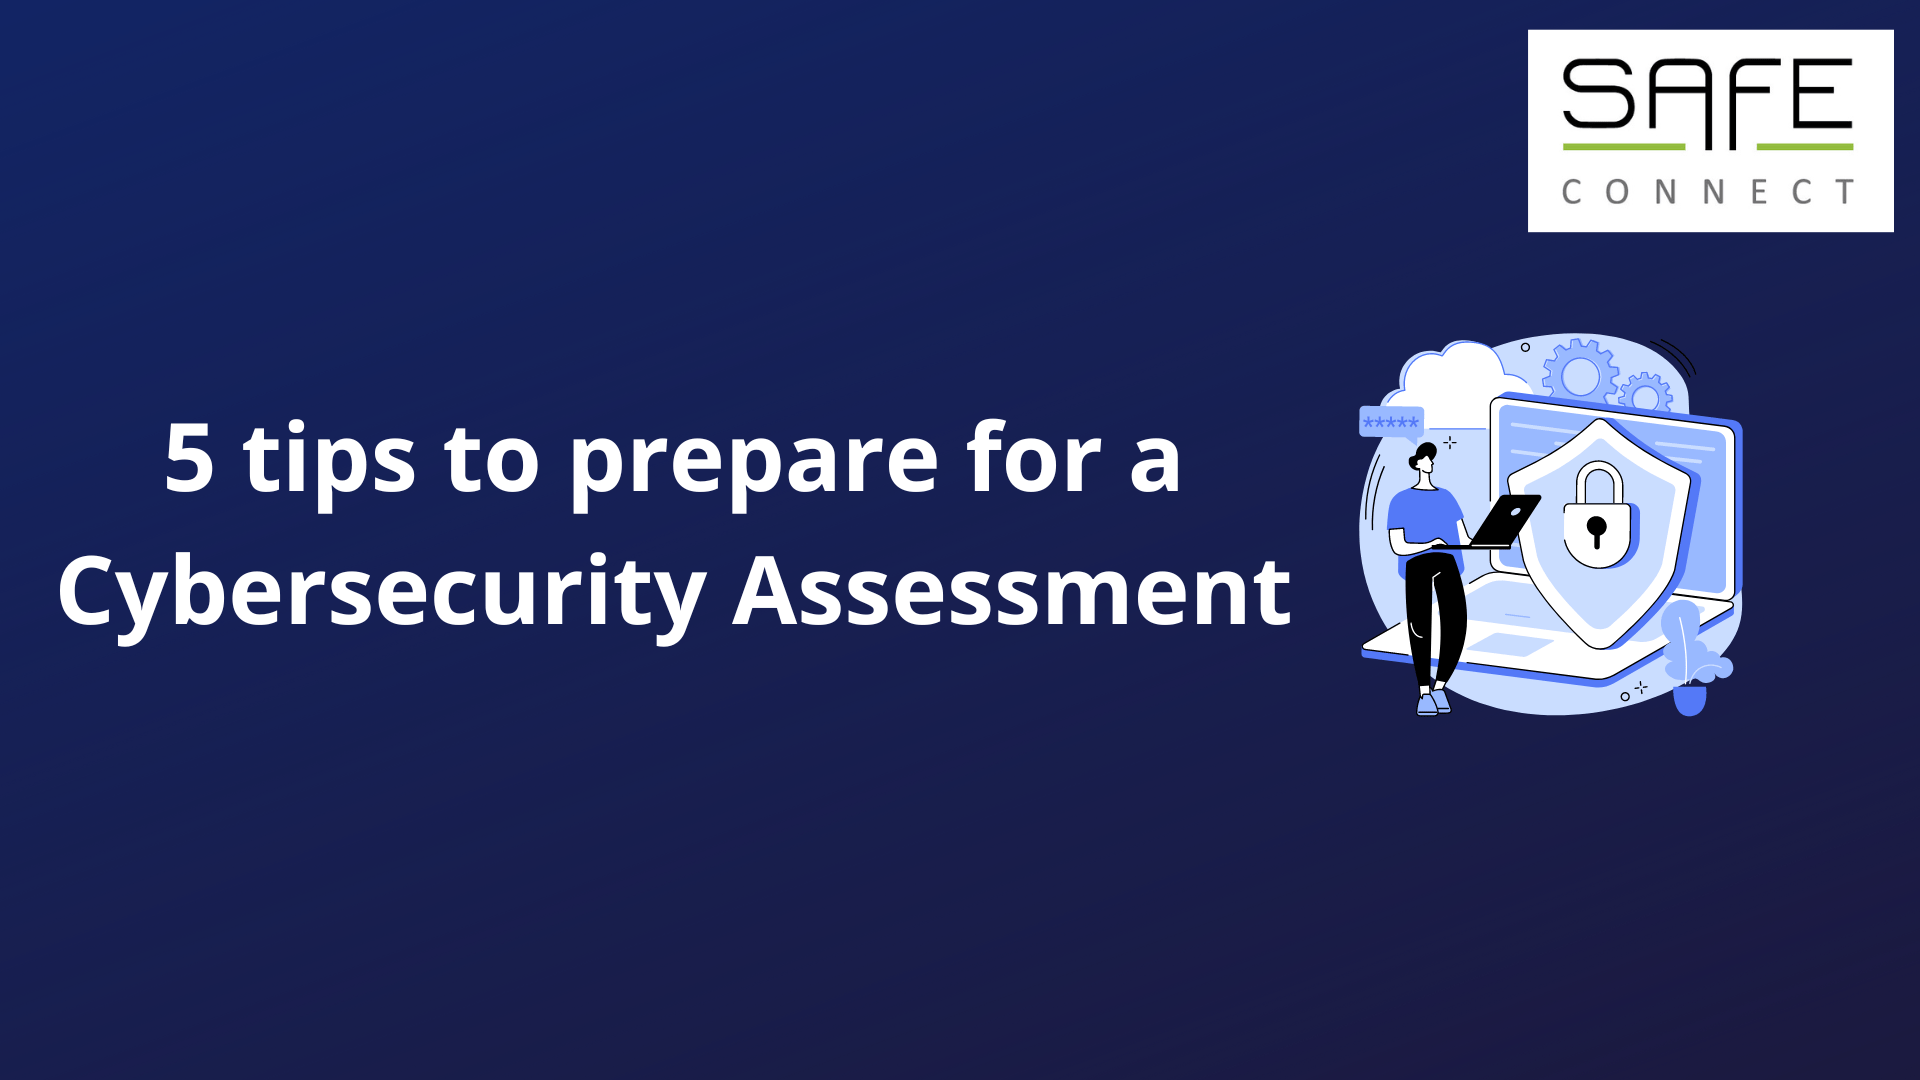 5 tips to prepare for a Cybersecurity Assessment